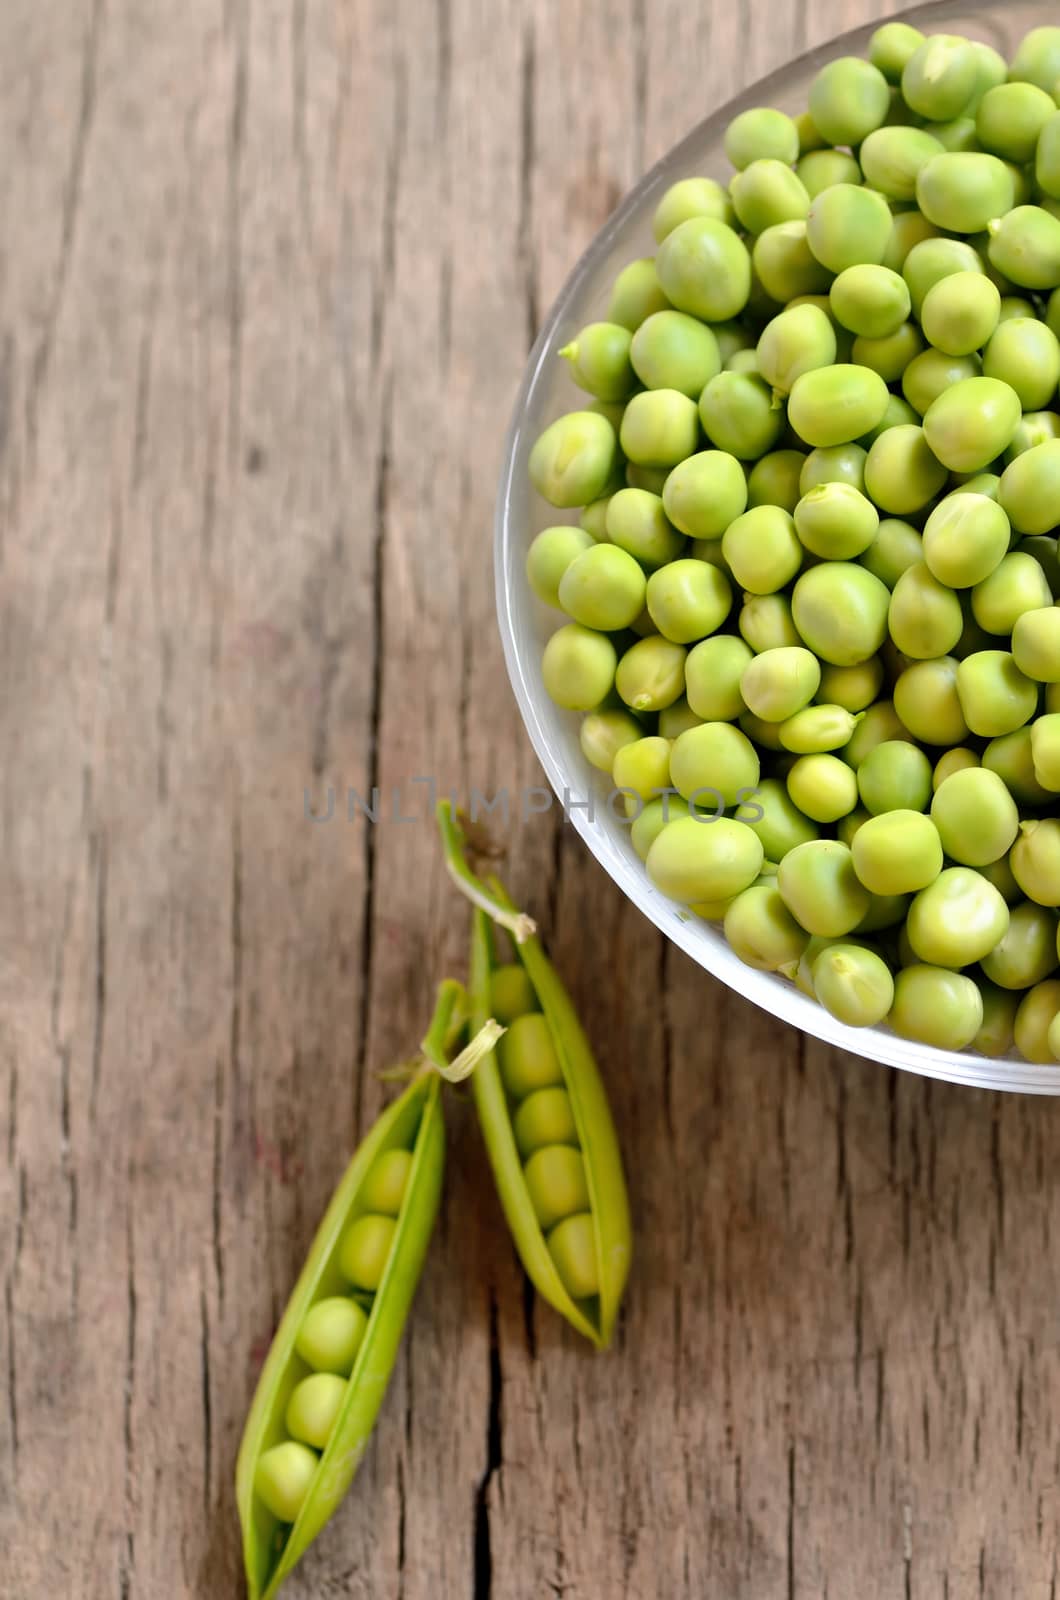 Green peas in a bowl on a wooden background